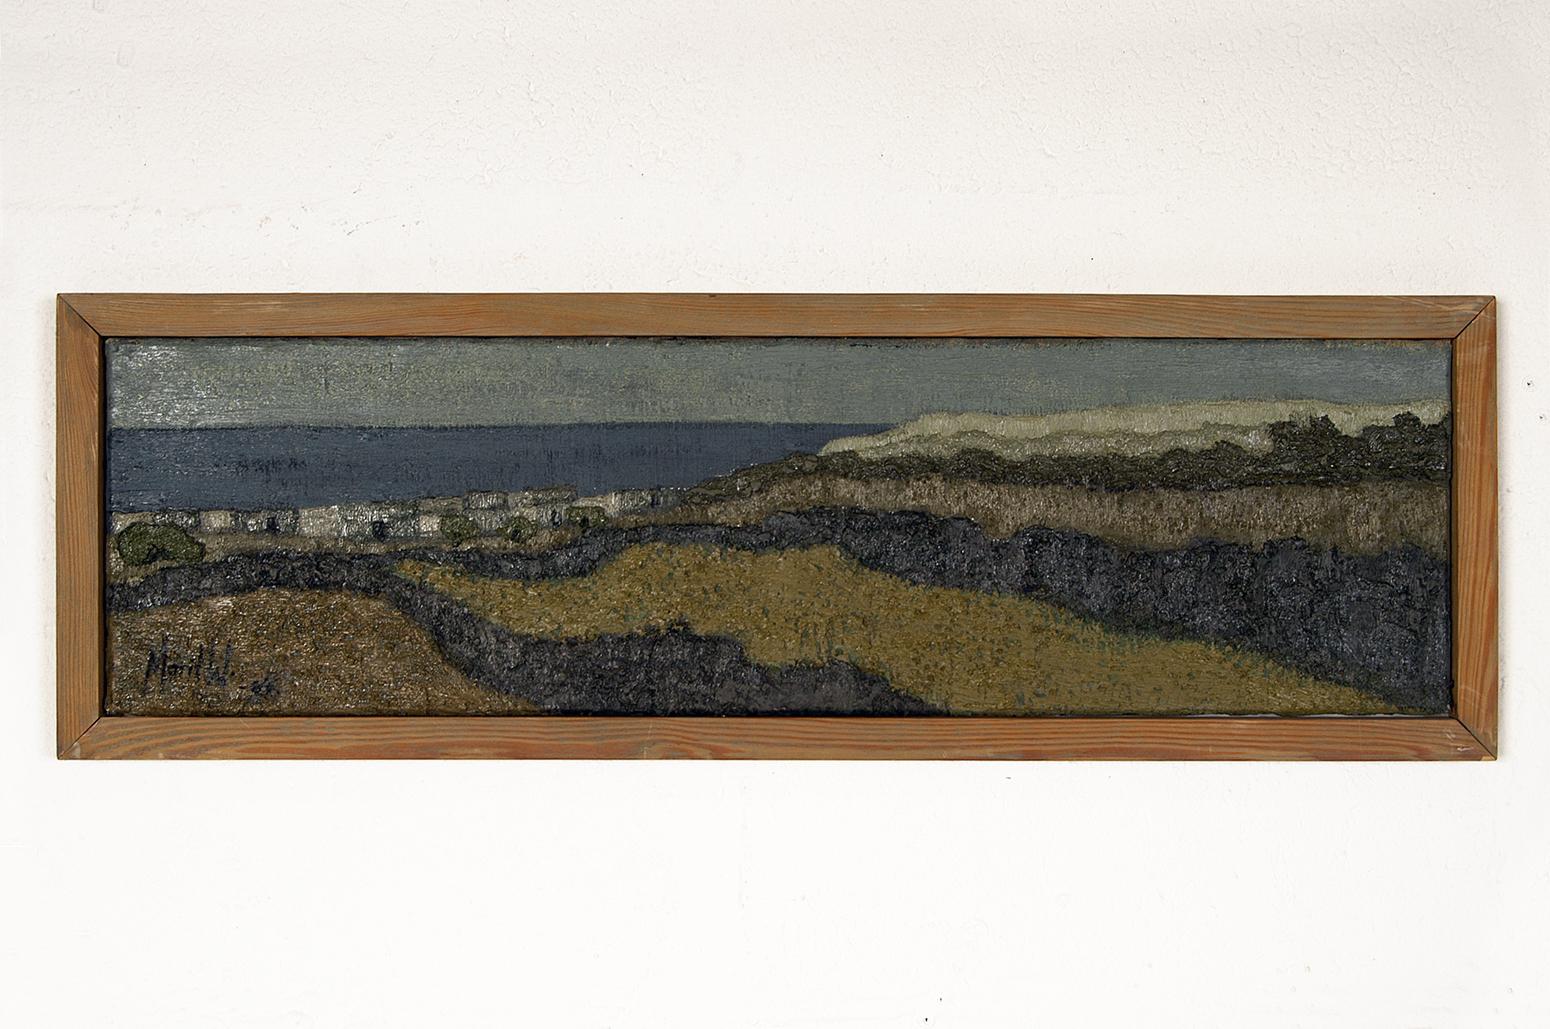 A good richly textured original 1960s impressionist oil on canvas painting titled: ‘Lavasträngar II, Lanzarote, Spanien’ (Lava Strings II, Lanzarote, Spain) by Swedish Artist Marit Wahlström Schönbäch, who was well known for her landscape paintings